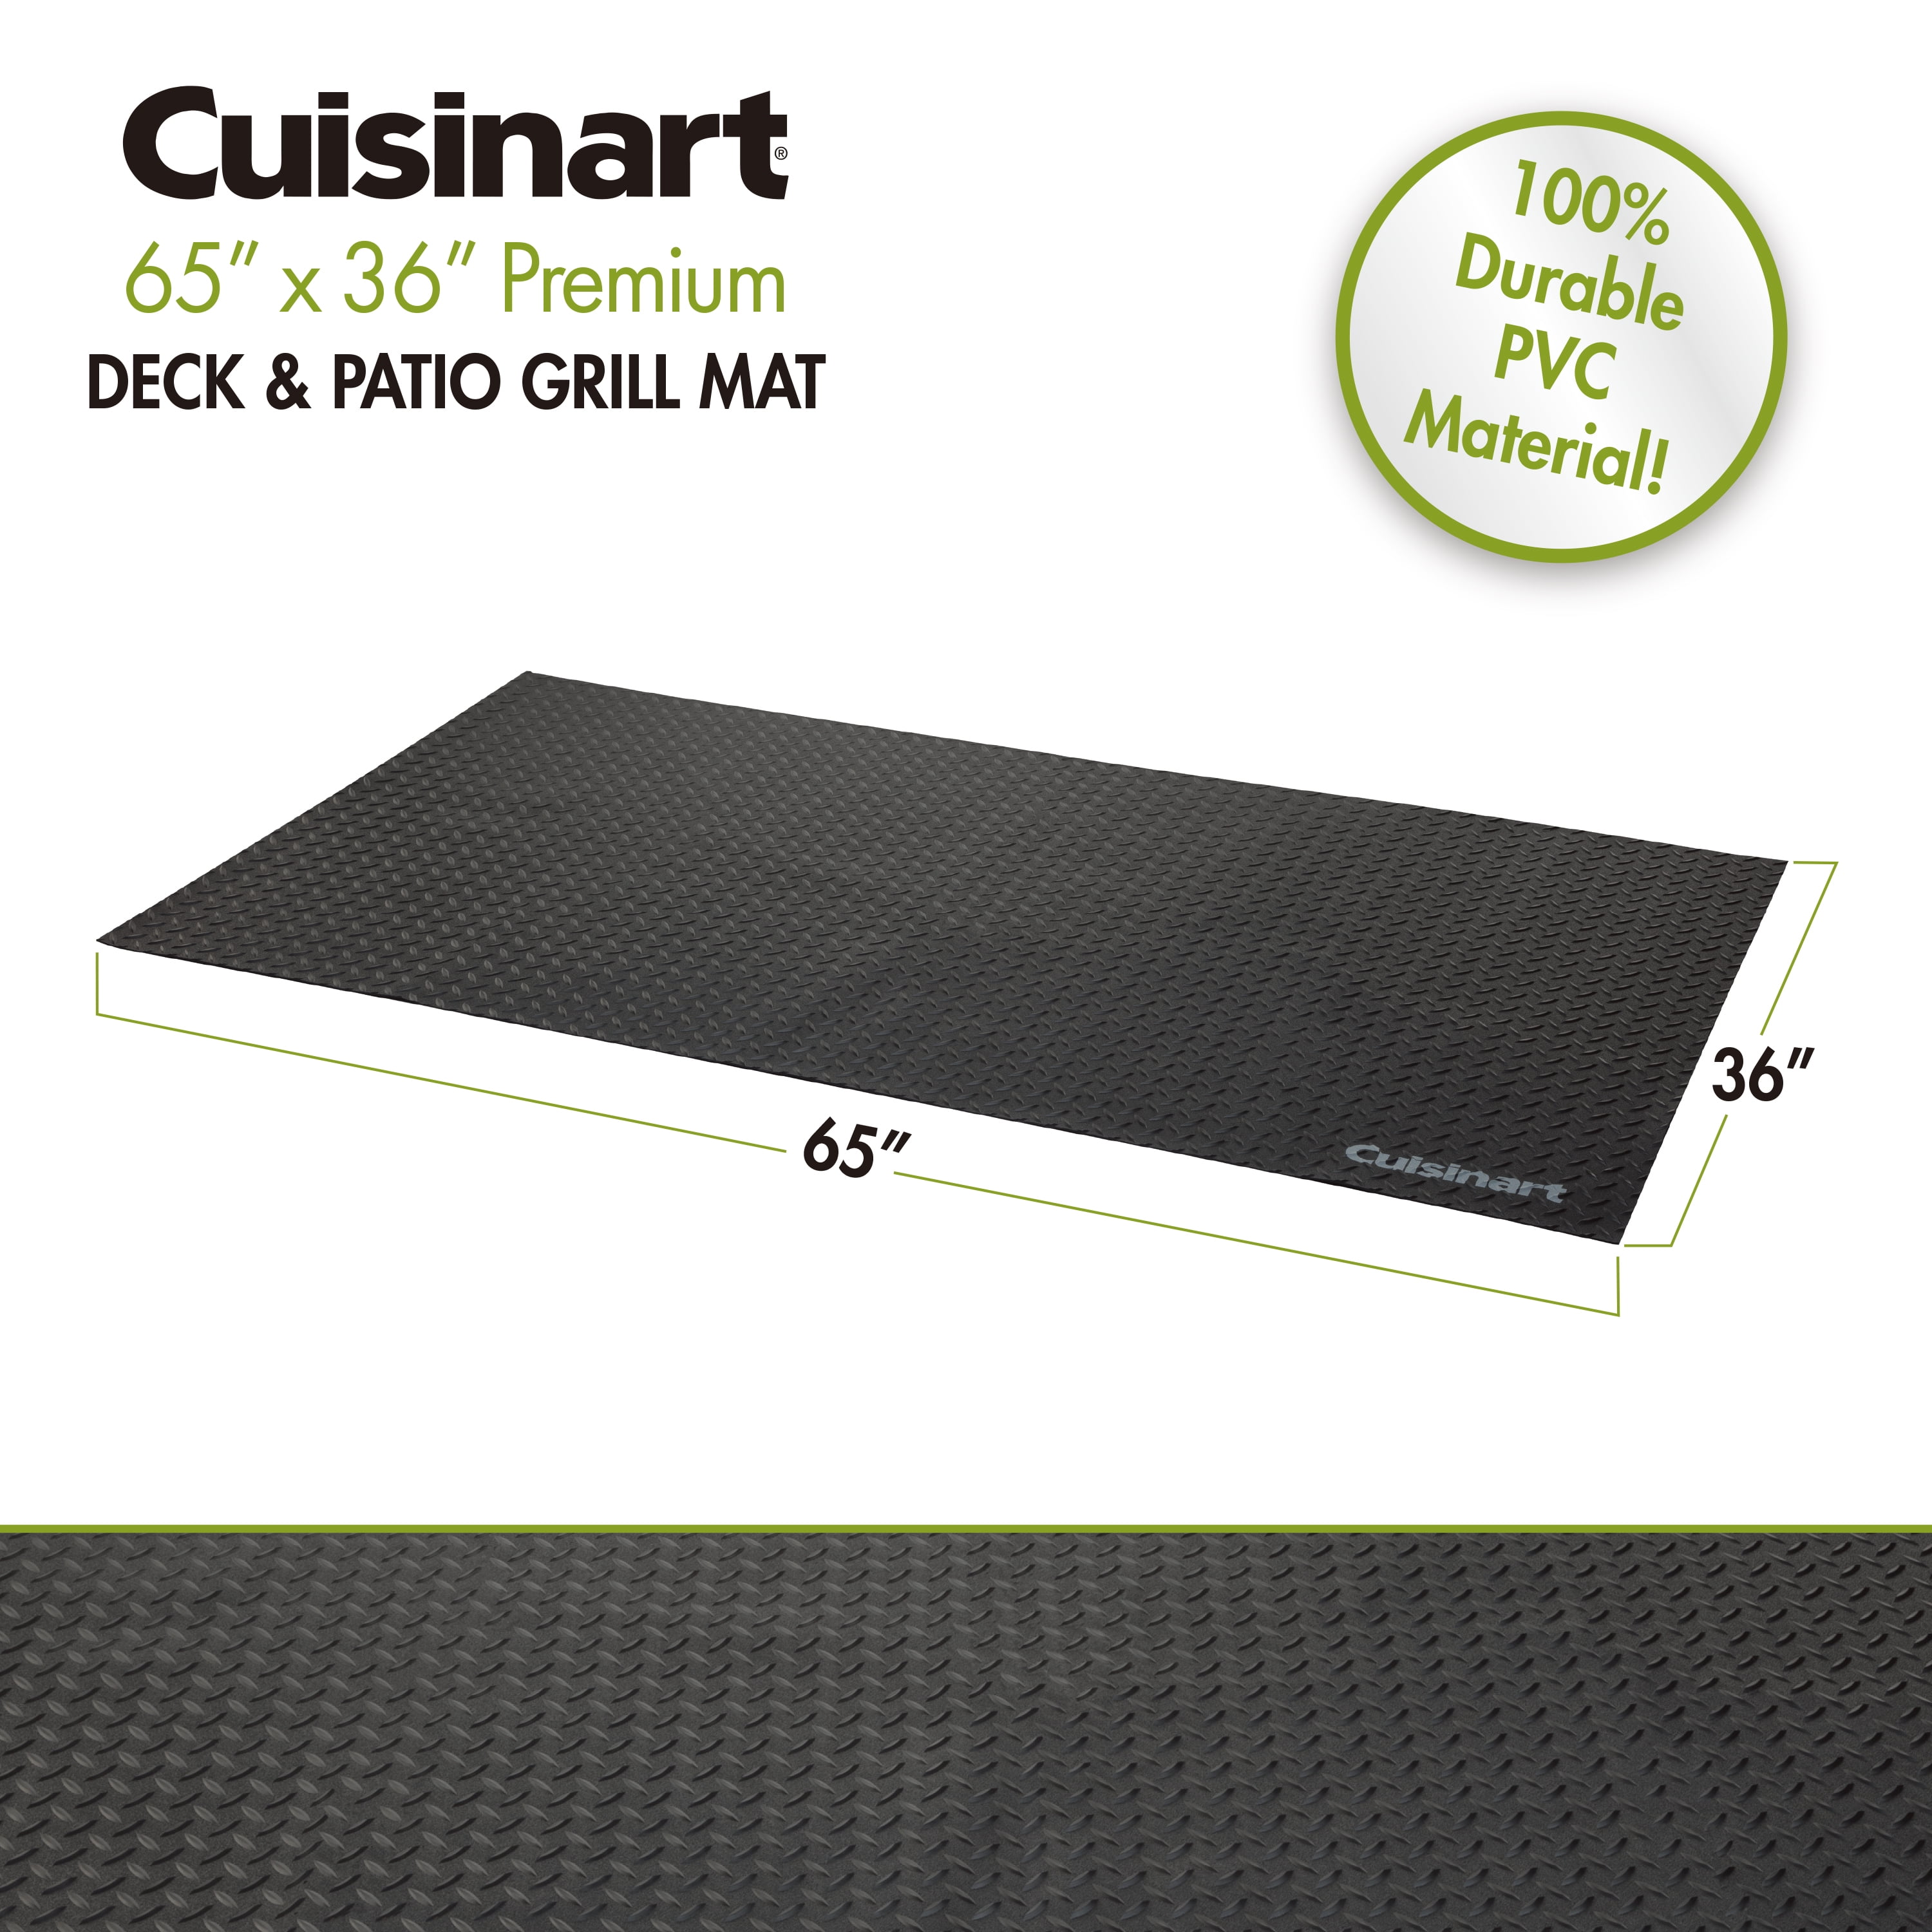 Cuisinart 65-In. x 36-In. Premium Deck and Patio Grill Mat, Black - image 2 of 7